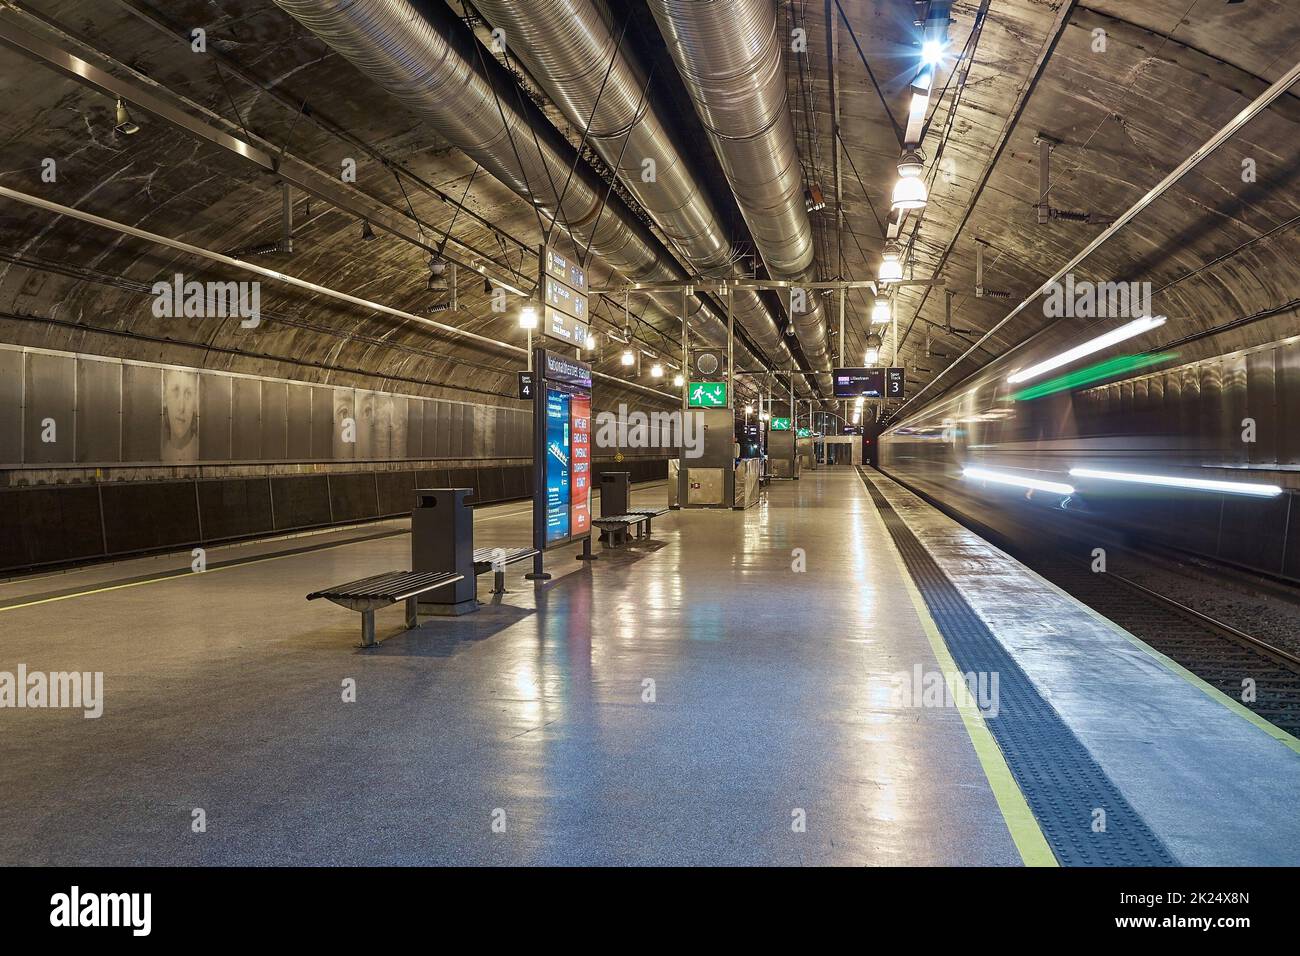 Oslo, Norway - Circa 2015: Underground train station in Oslo, capital of Norway train arriving with motion blur Stock Photo